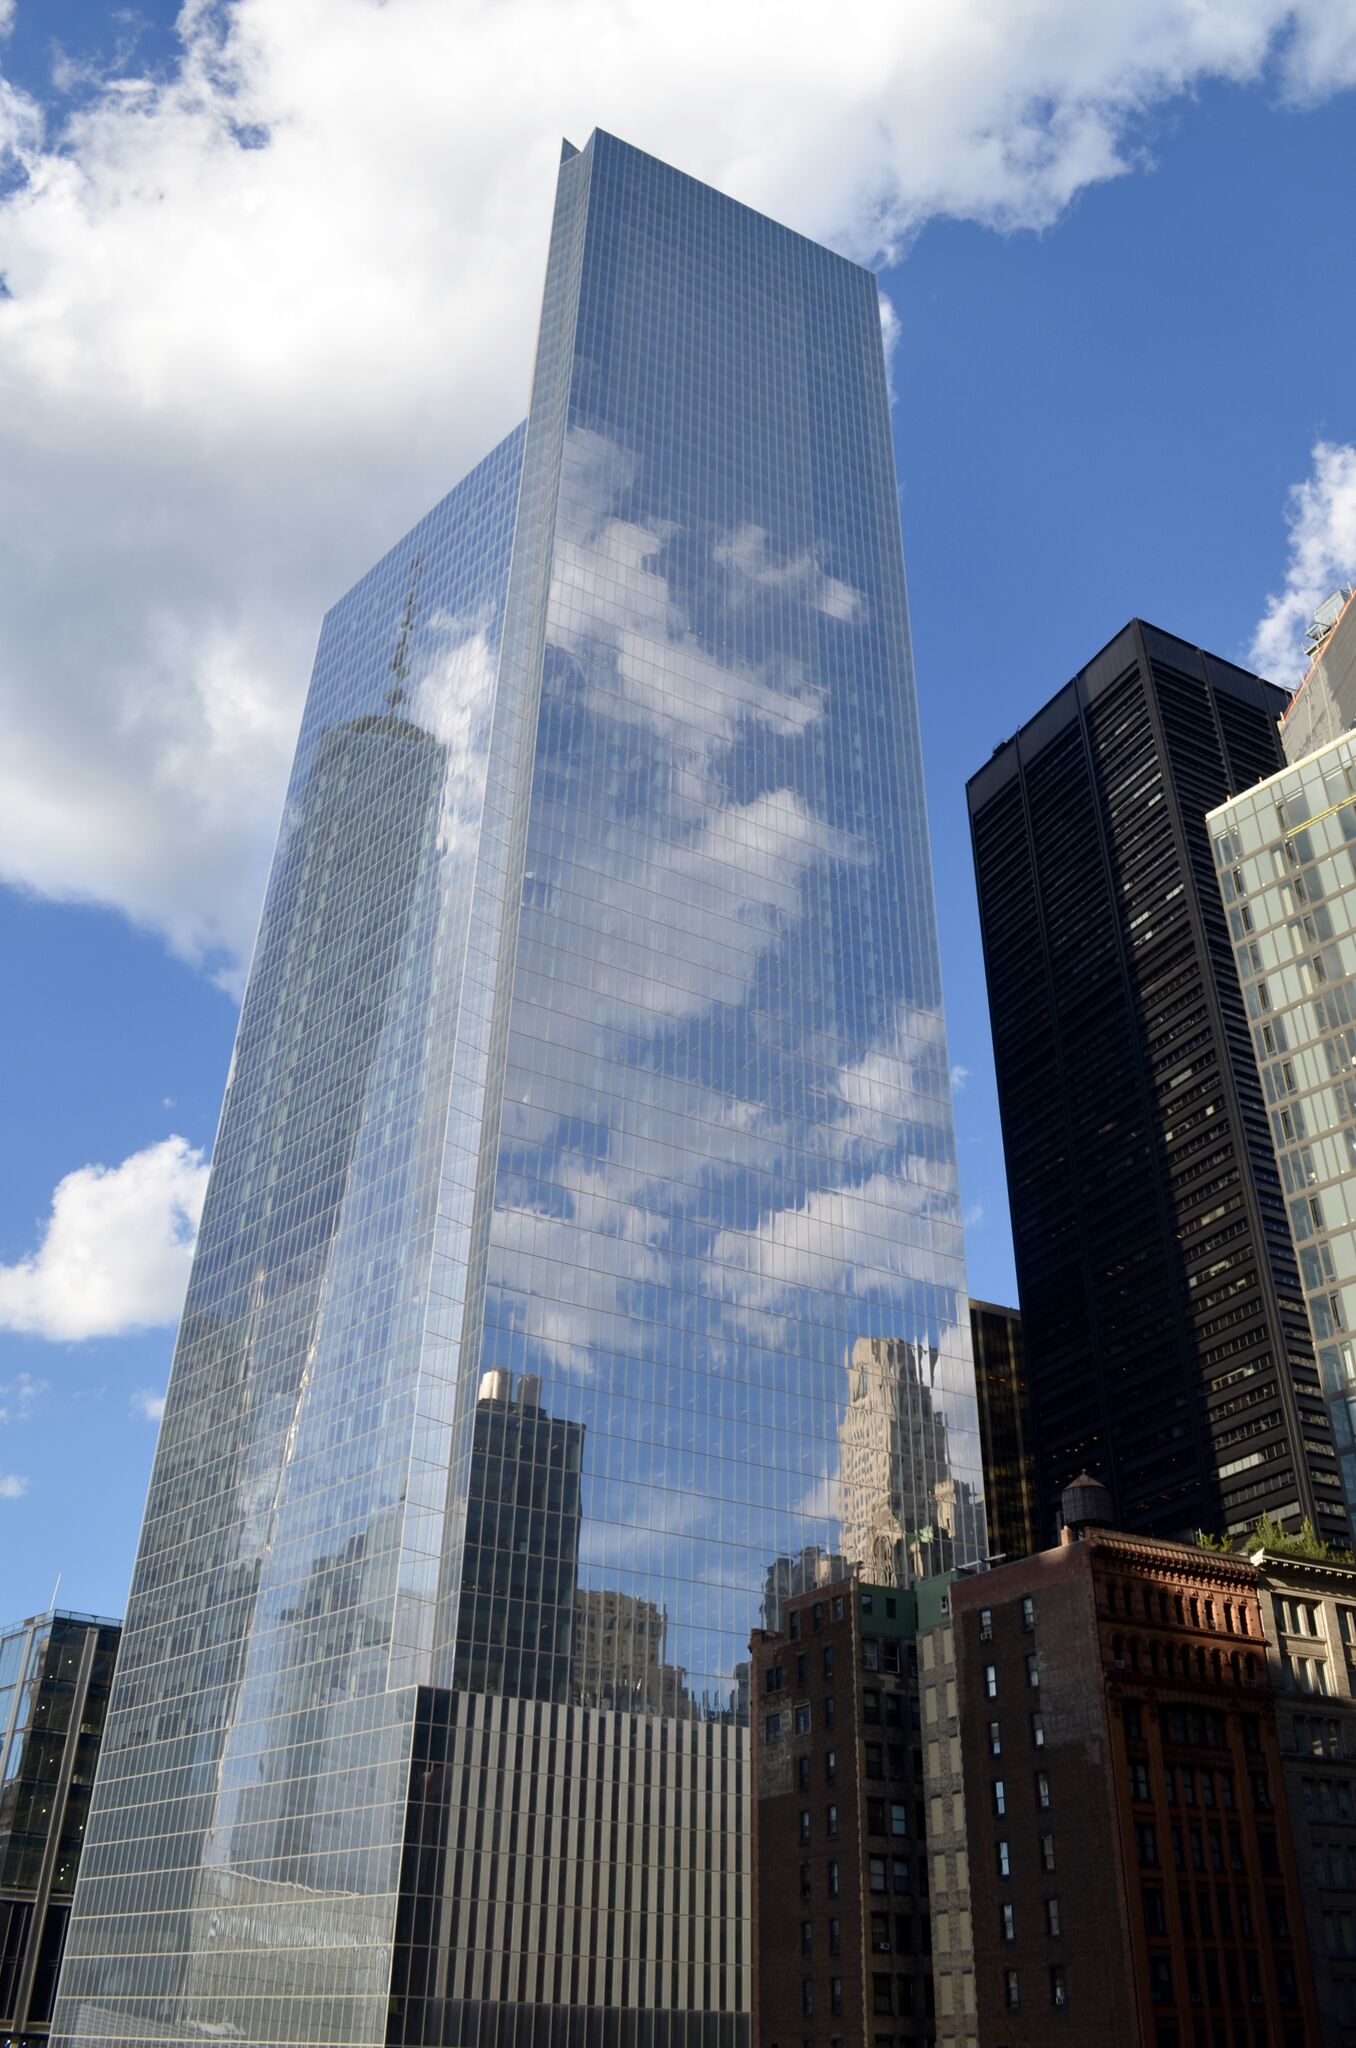 U.S. Division of Swiss Insurance Giant Headed for 4 WTC